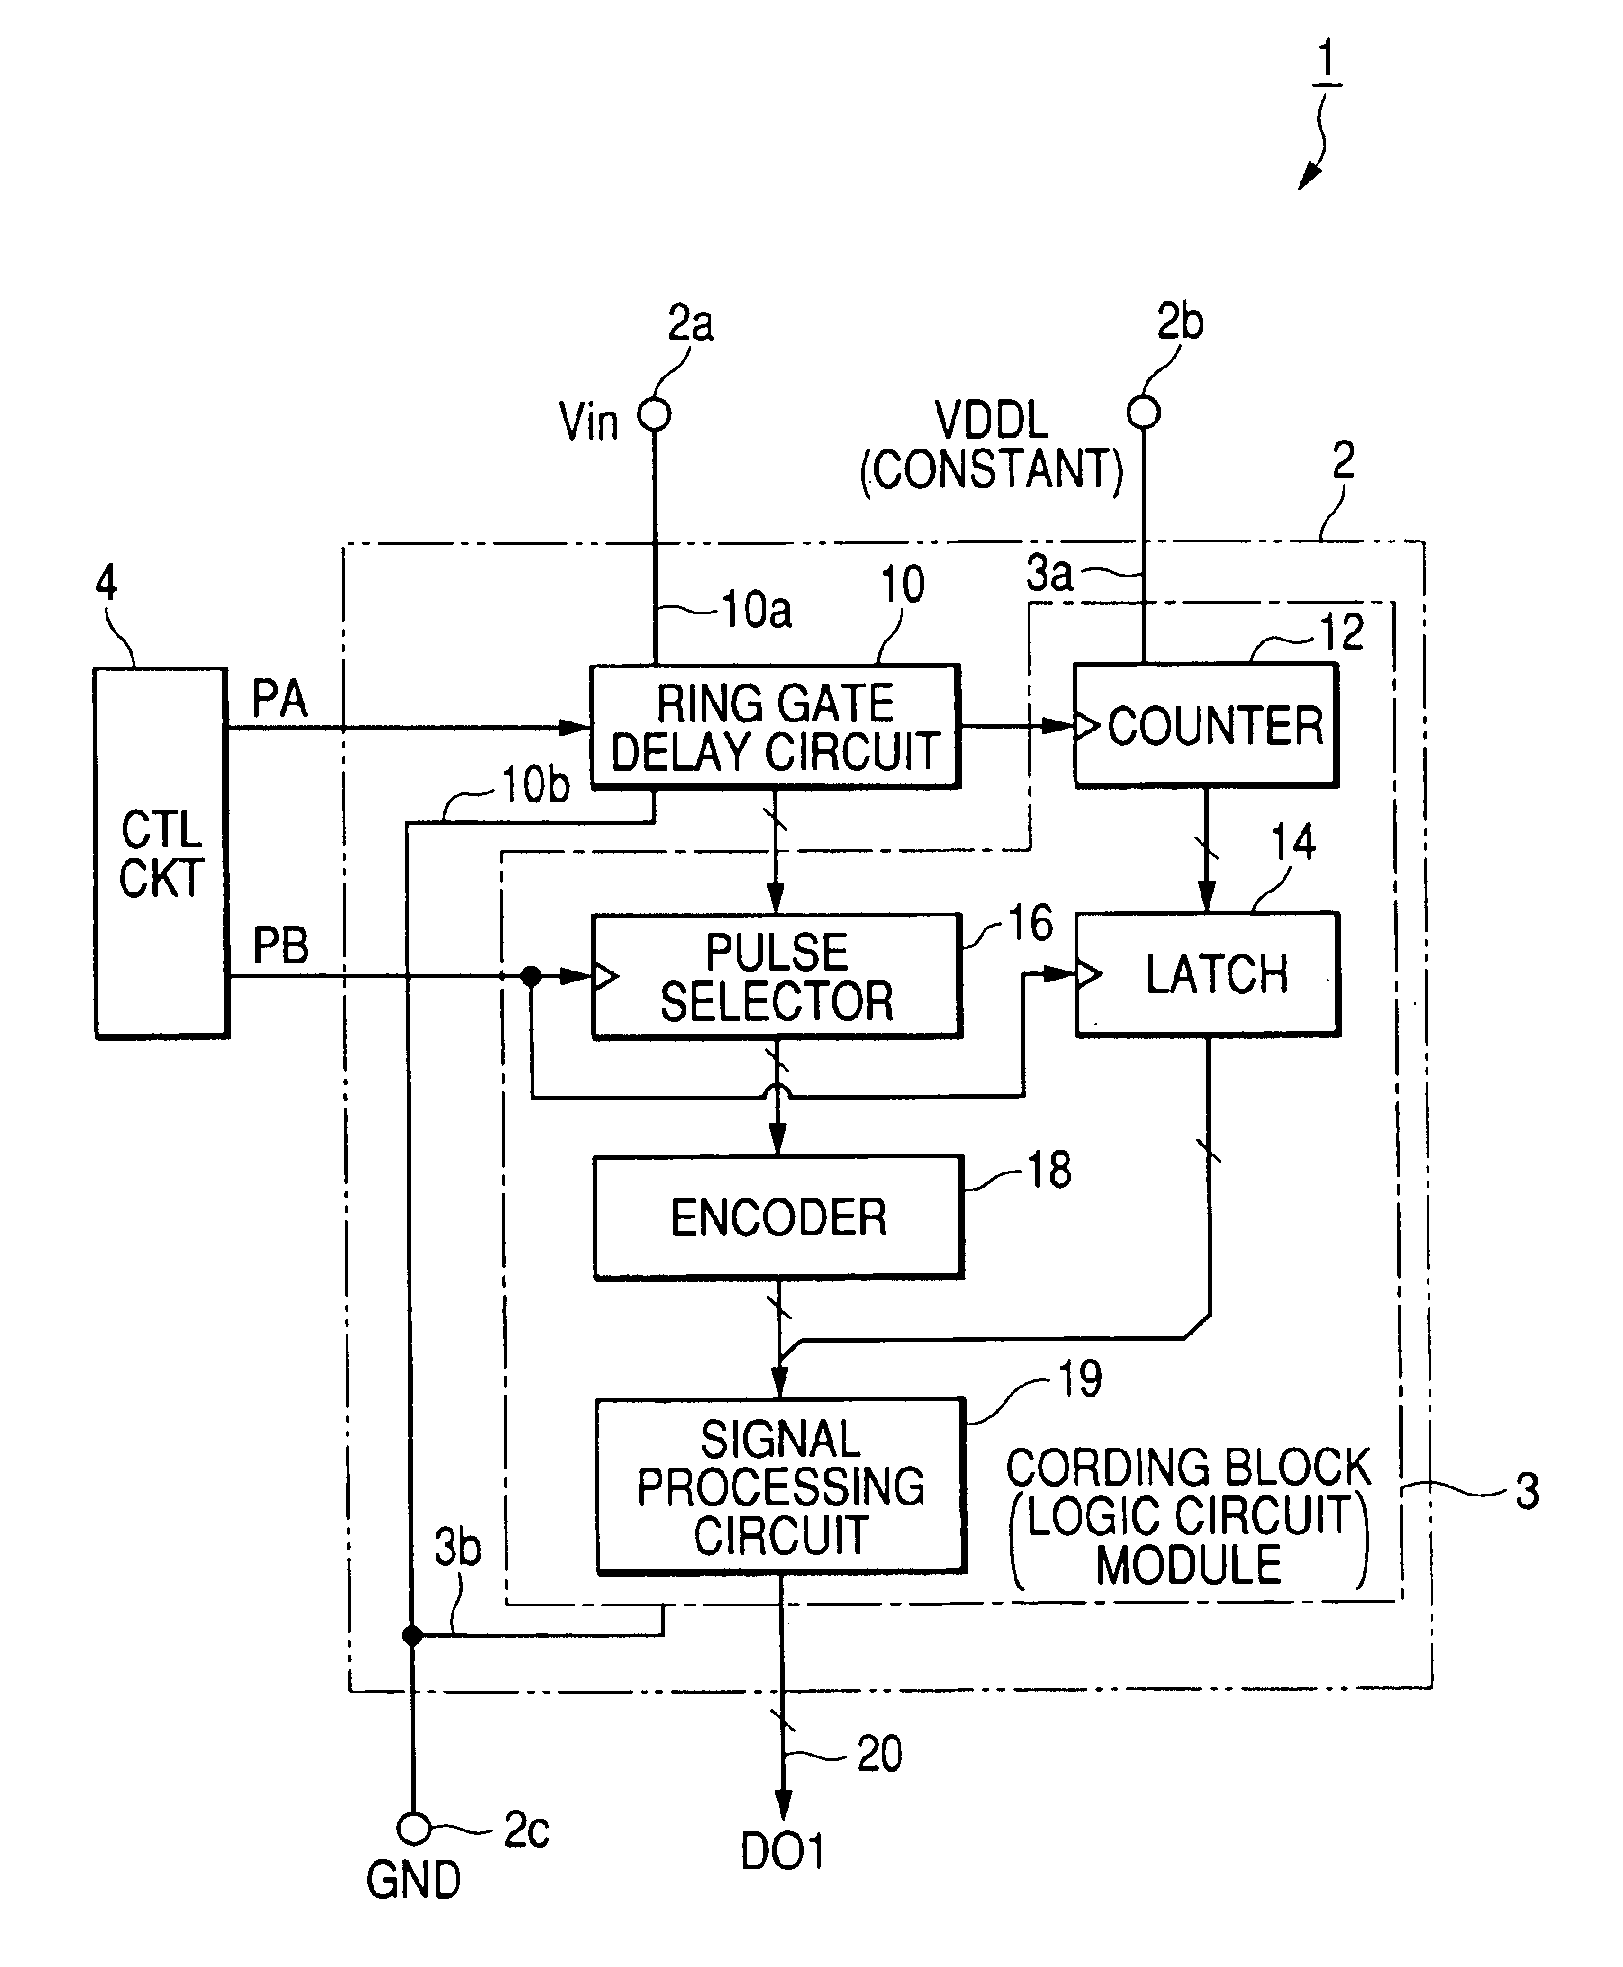 Analog to digital converter with a pulse delay circuit